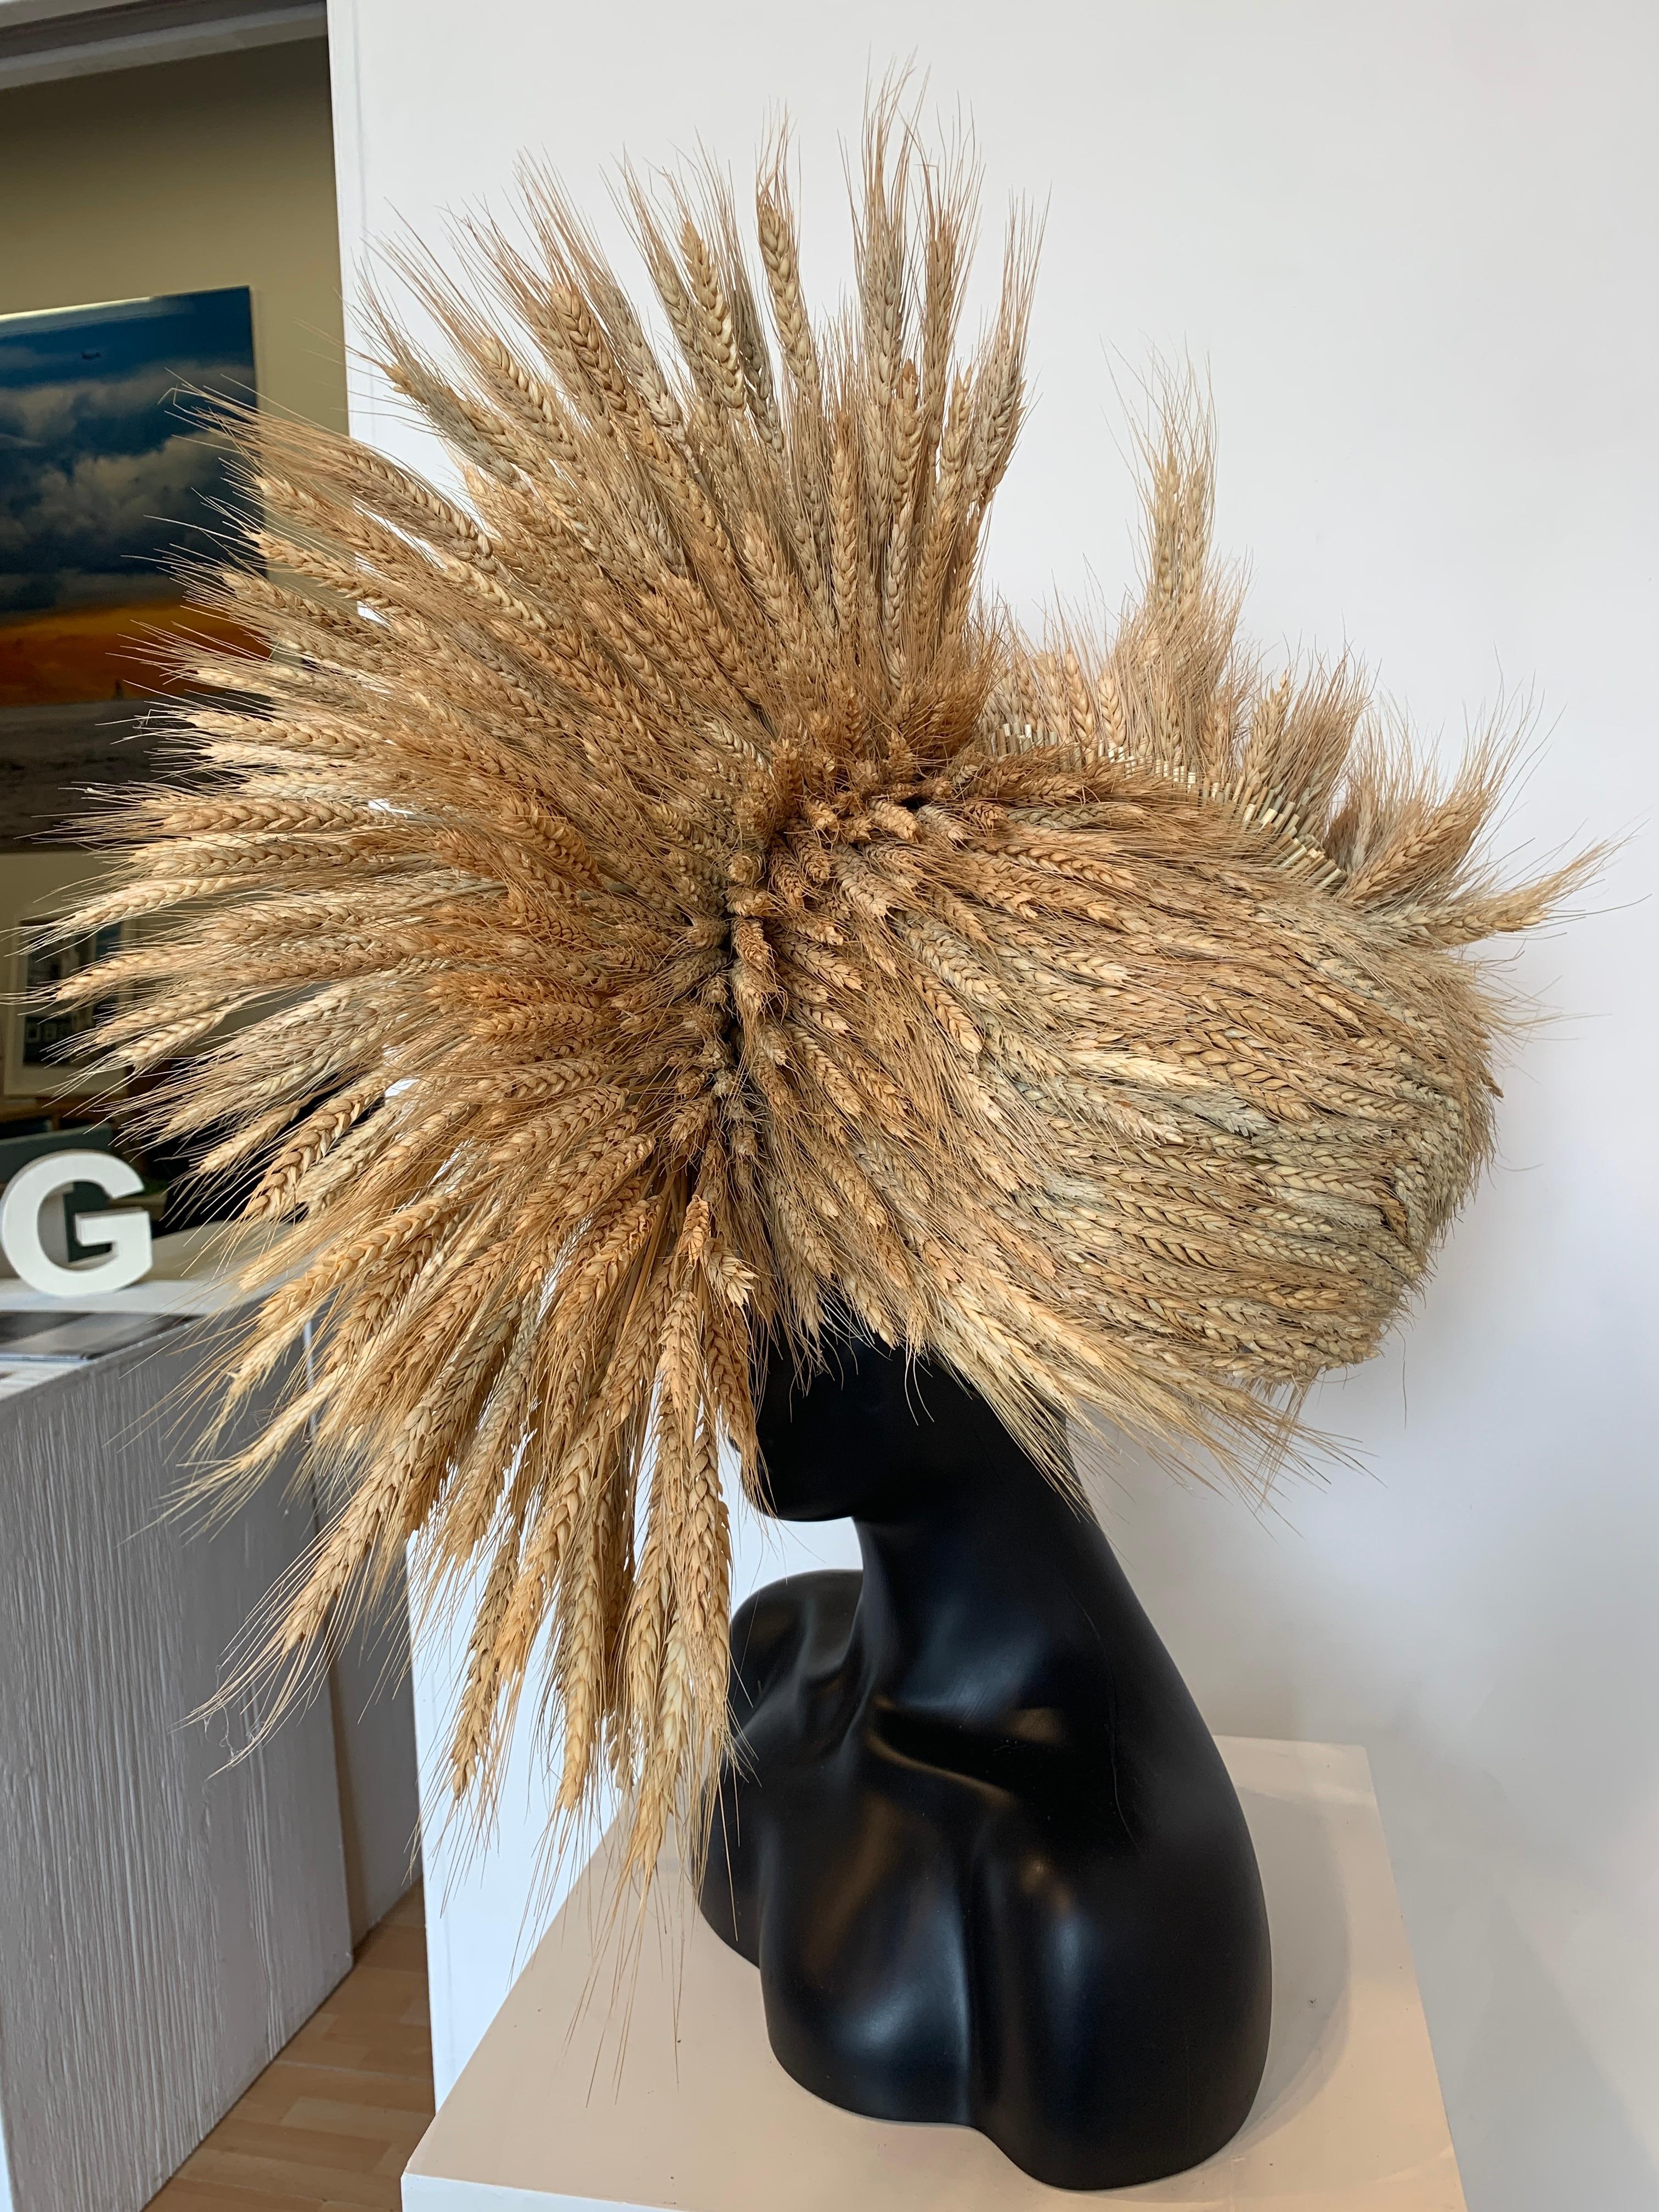 Wearable sculpture created with wheat. Dimensions variable depending upon how the work is displayed.